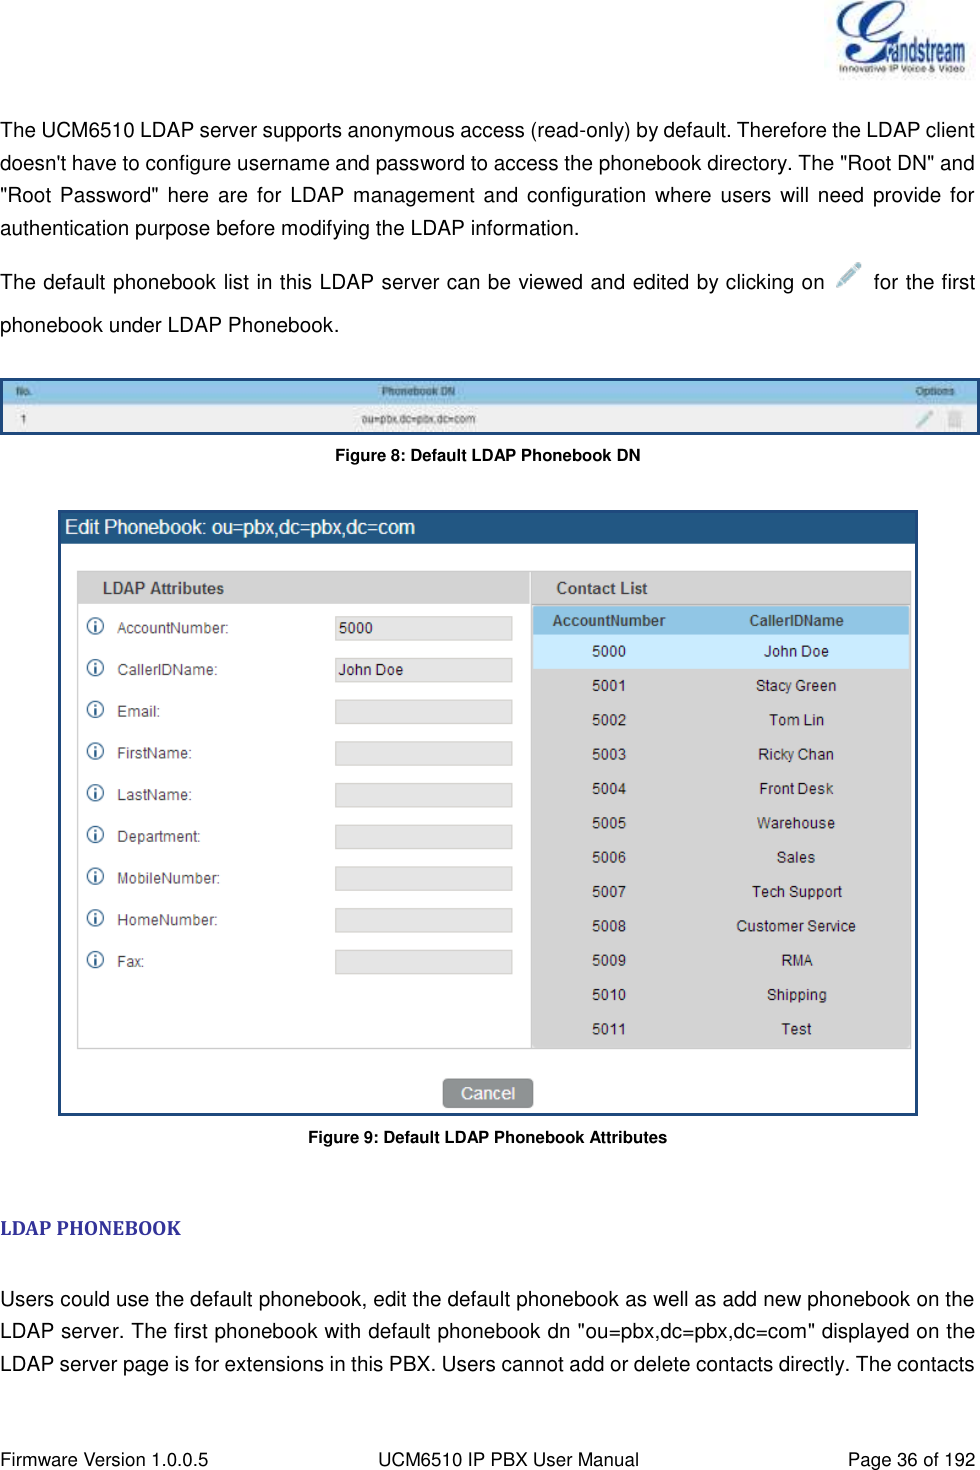  Firmware Version 1.0.0.5 UCM6510 IP PBX User Manual Page 36 of 192   The UCM6510 LDAP server supports anonymous access (read-only) by default. Therefore the LDAP client doesn&apos;t have to configure username and password to access the phonebook directory. The &quot;Root DN&quot; and &quot;Root Password&quot;  here  are  for LDAP management and configuration  where  users will need  provide for authentication purpose before modifying the LDAP information. The default phonebook list in this LDAP server can be viewed and edited by clicking on    for the first phonebook under LDAP Phonebook.   Figure 8: Default LDAP Phonebook DN   Figure 9: Default LDAP Phonebook Attributes  LDAP PHONEBOOK  Users could use the default phonebook, edit the default phonebook as well as add new phonebook on the LDAP server. The first phonebook with default phonebook dn &quot;ou=pbx,dc=pbx,dc=com&quot; displayed on the LDAP server page is for extensions in this PBX. Users cannot add or delete contacts directly. The contacts 